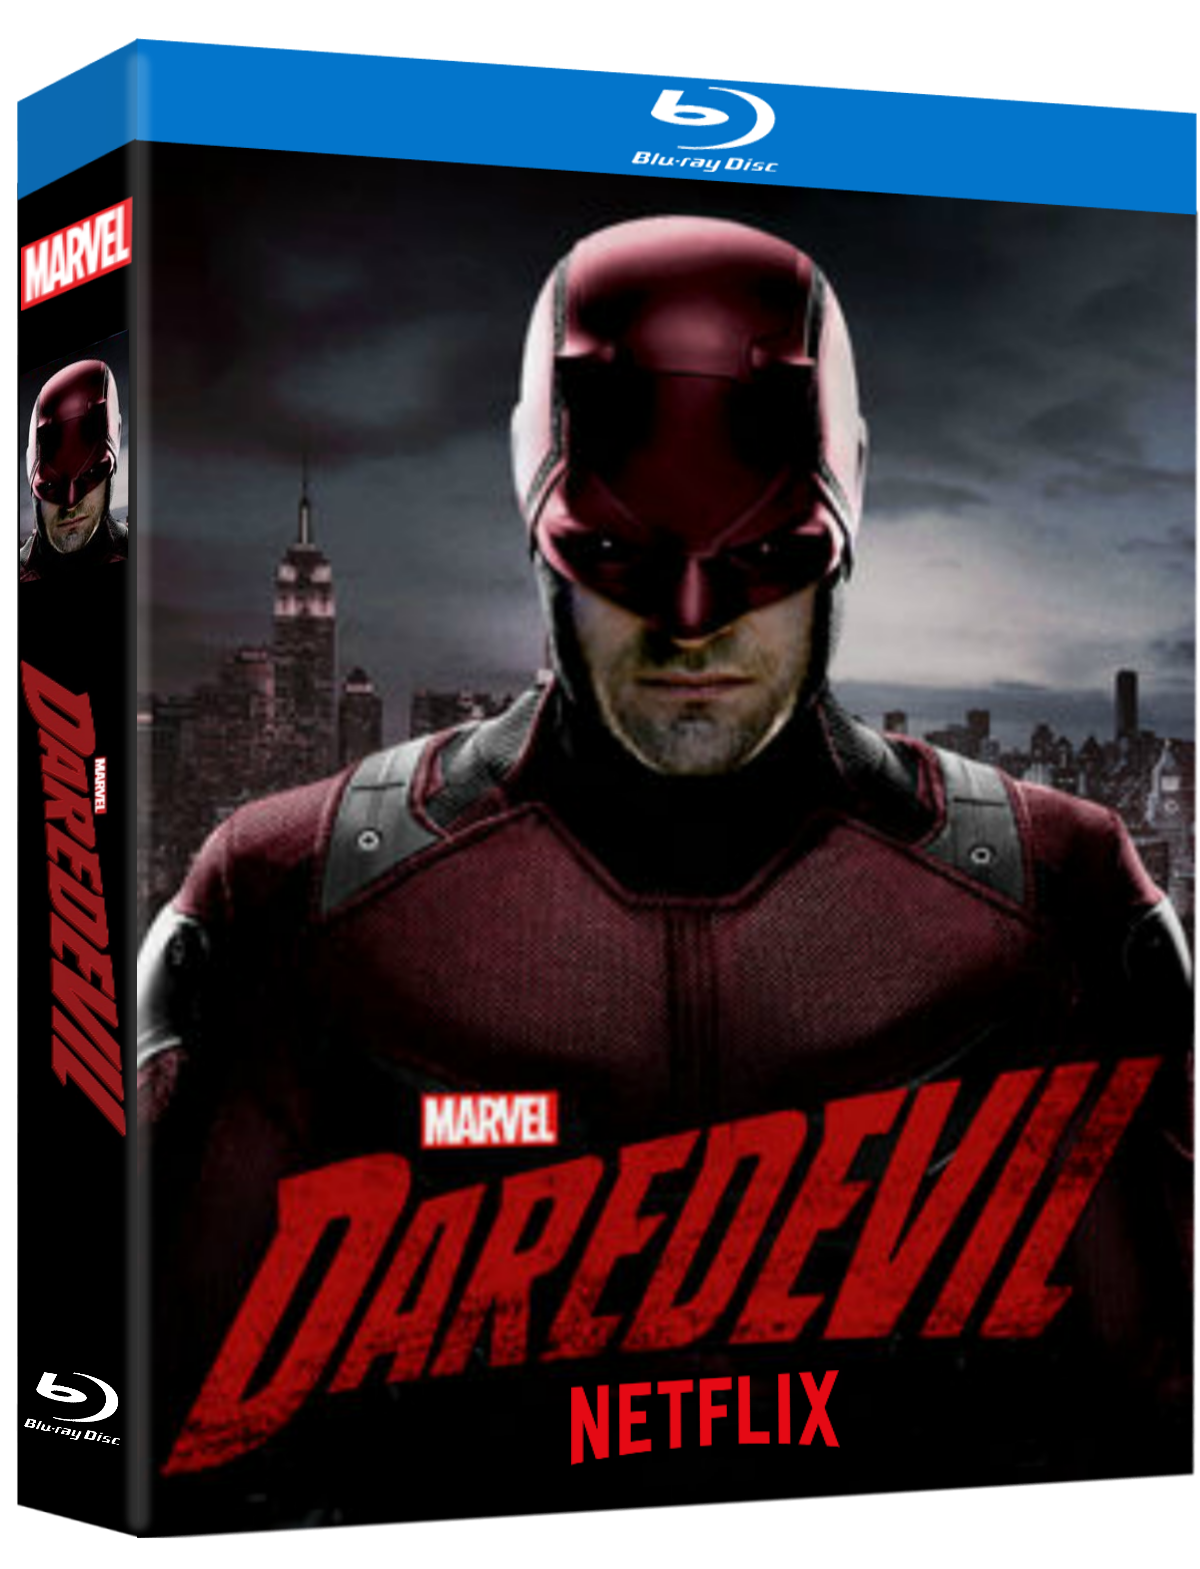 My Blu Ray Covers Daredevil Bluray Covers